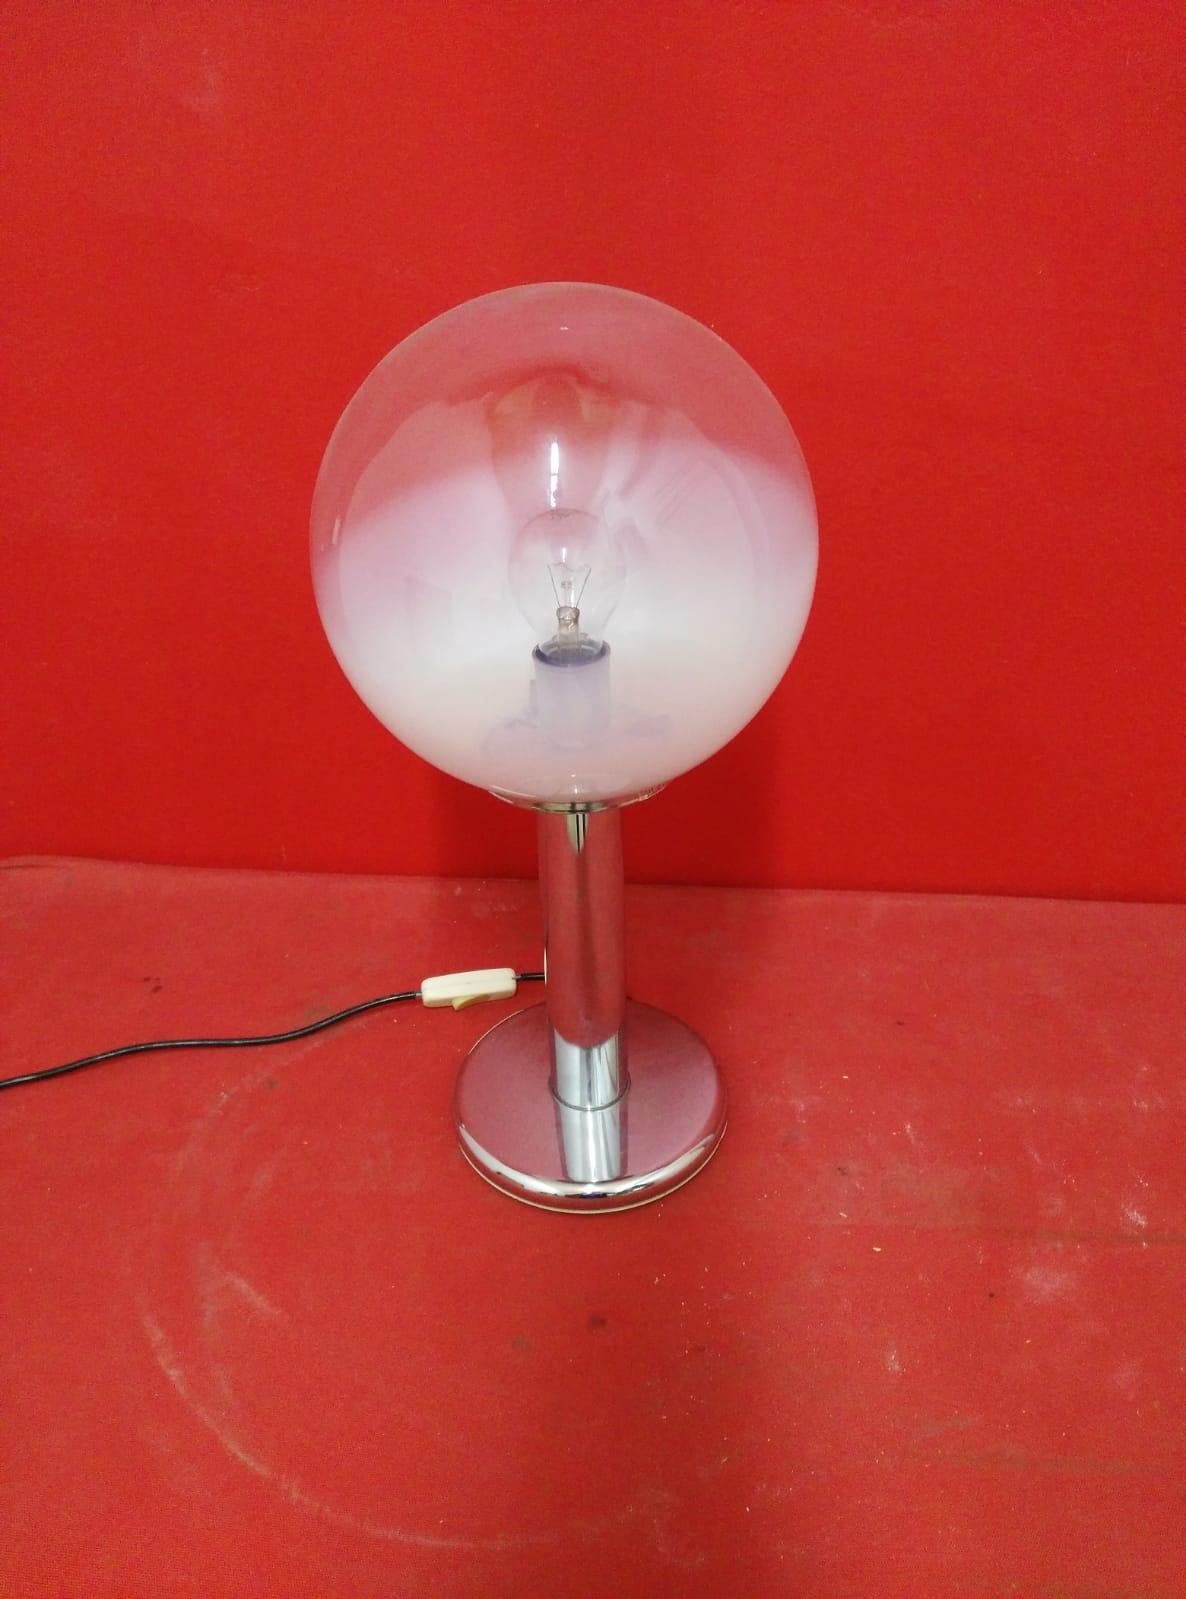 Beautiful Italian design lamp made of Murano glass, made by Mazzega. This lamp is from the 1960s. The glass is blown from white color, opalescent.
Together with the chrome table pedestal the lamp is about 40 cm. The lamp is in very good condition.